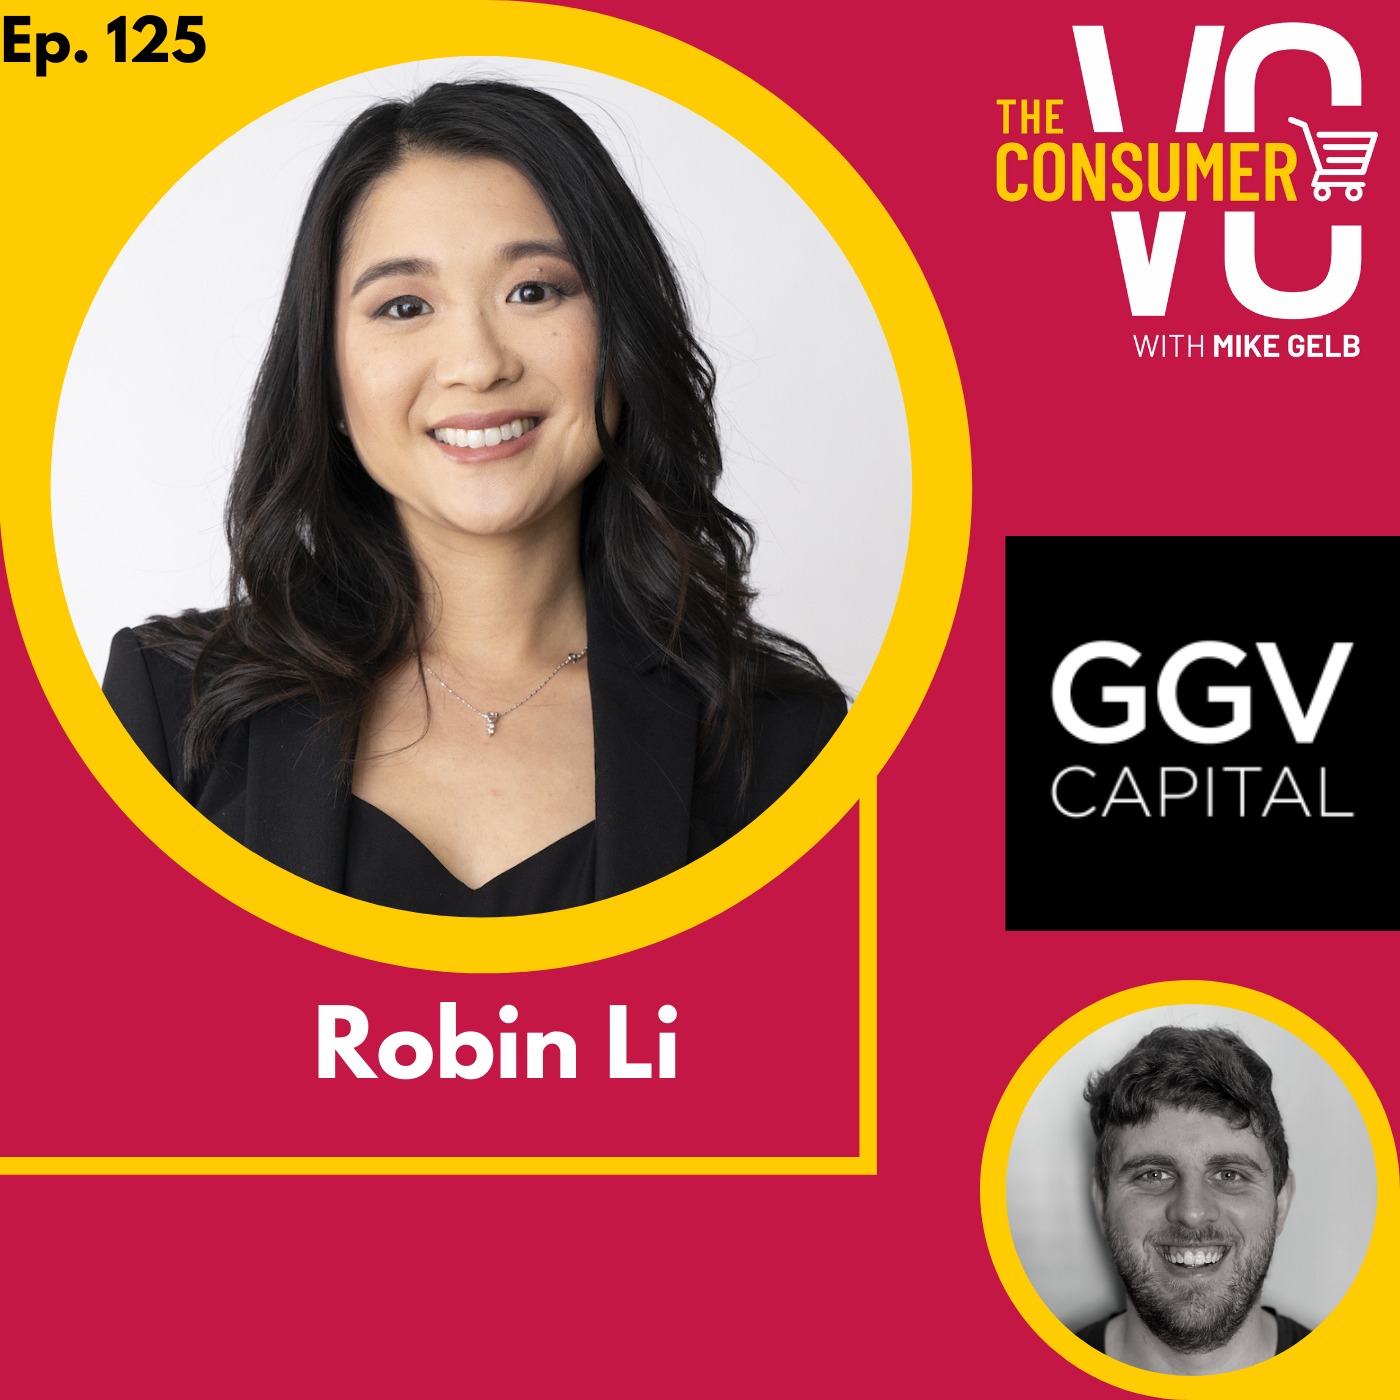 Robin Li (GGV Capital) - What U.S. investors can learn from China's consumer internet, bringing small businesses online and opportunities in the creator economy